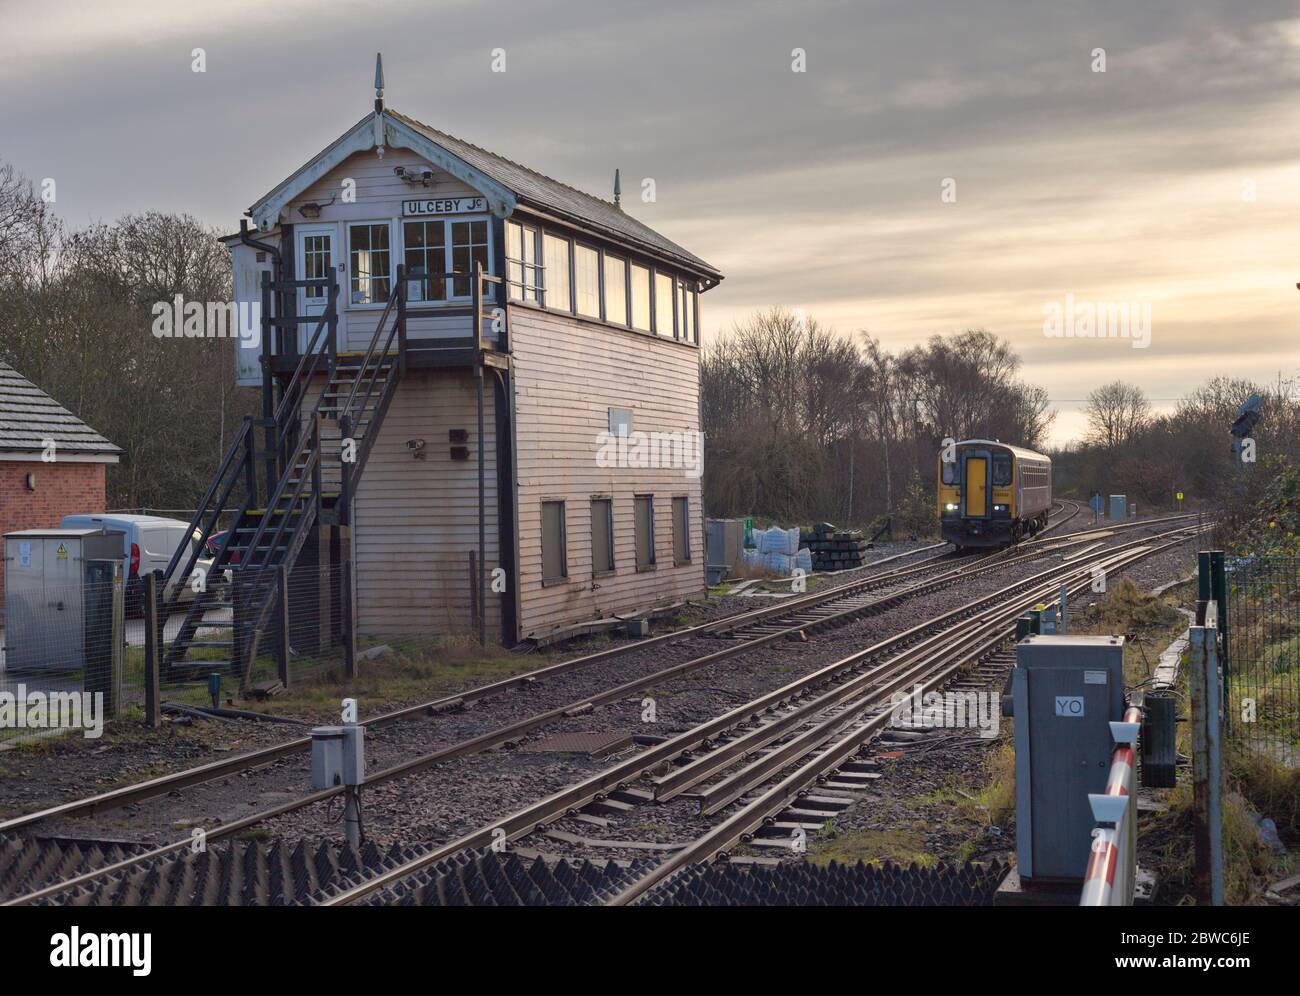 Northern rail class 153 single carriage train 153332 passing the large mechanical signal box at Ulceby, Lincolnshire Stock Photo